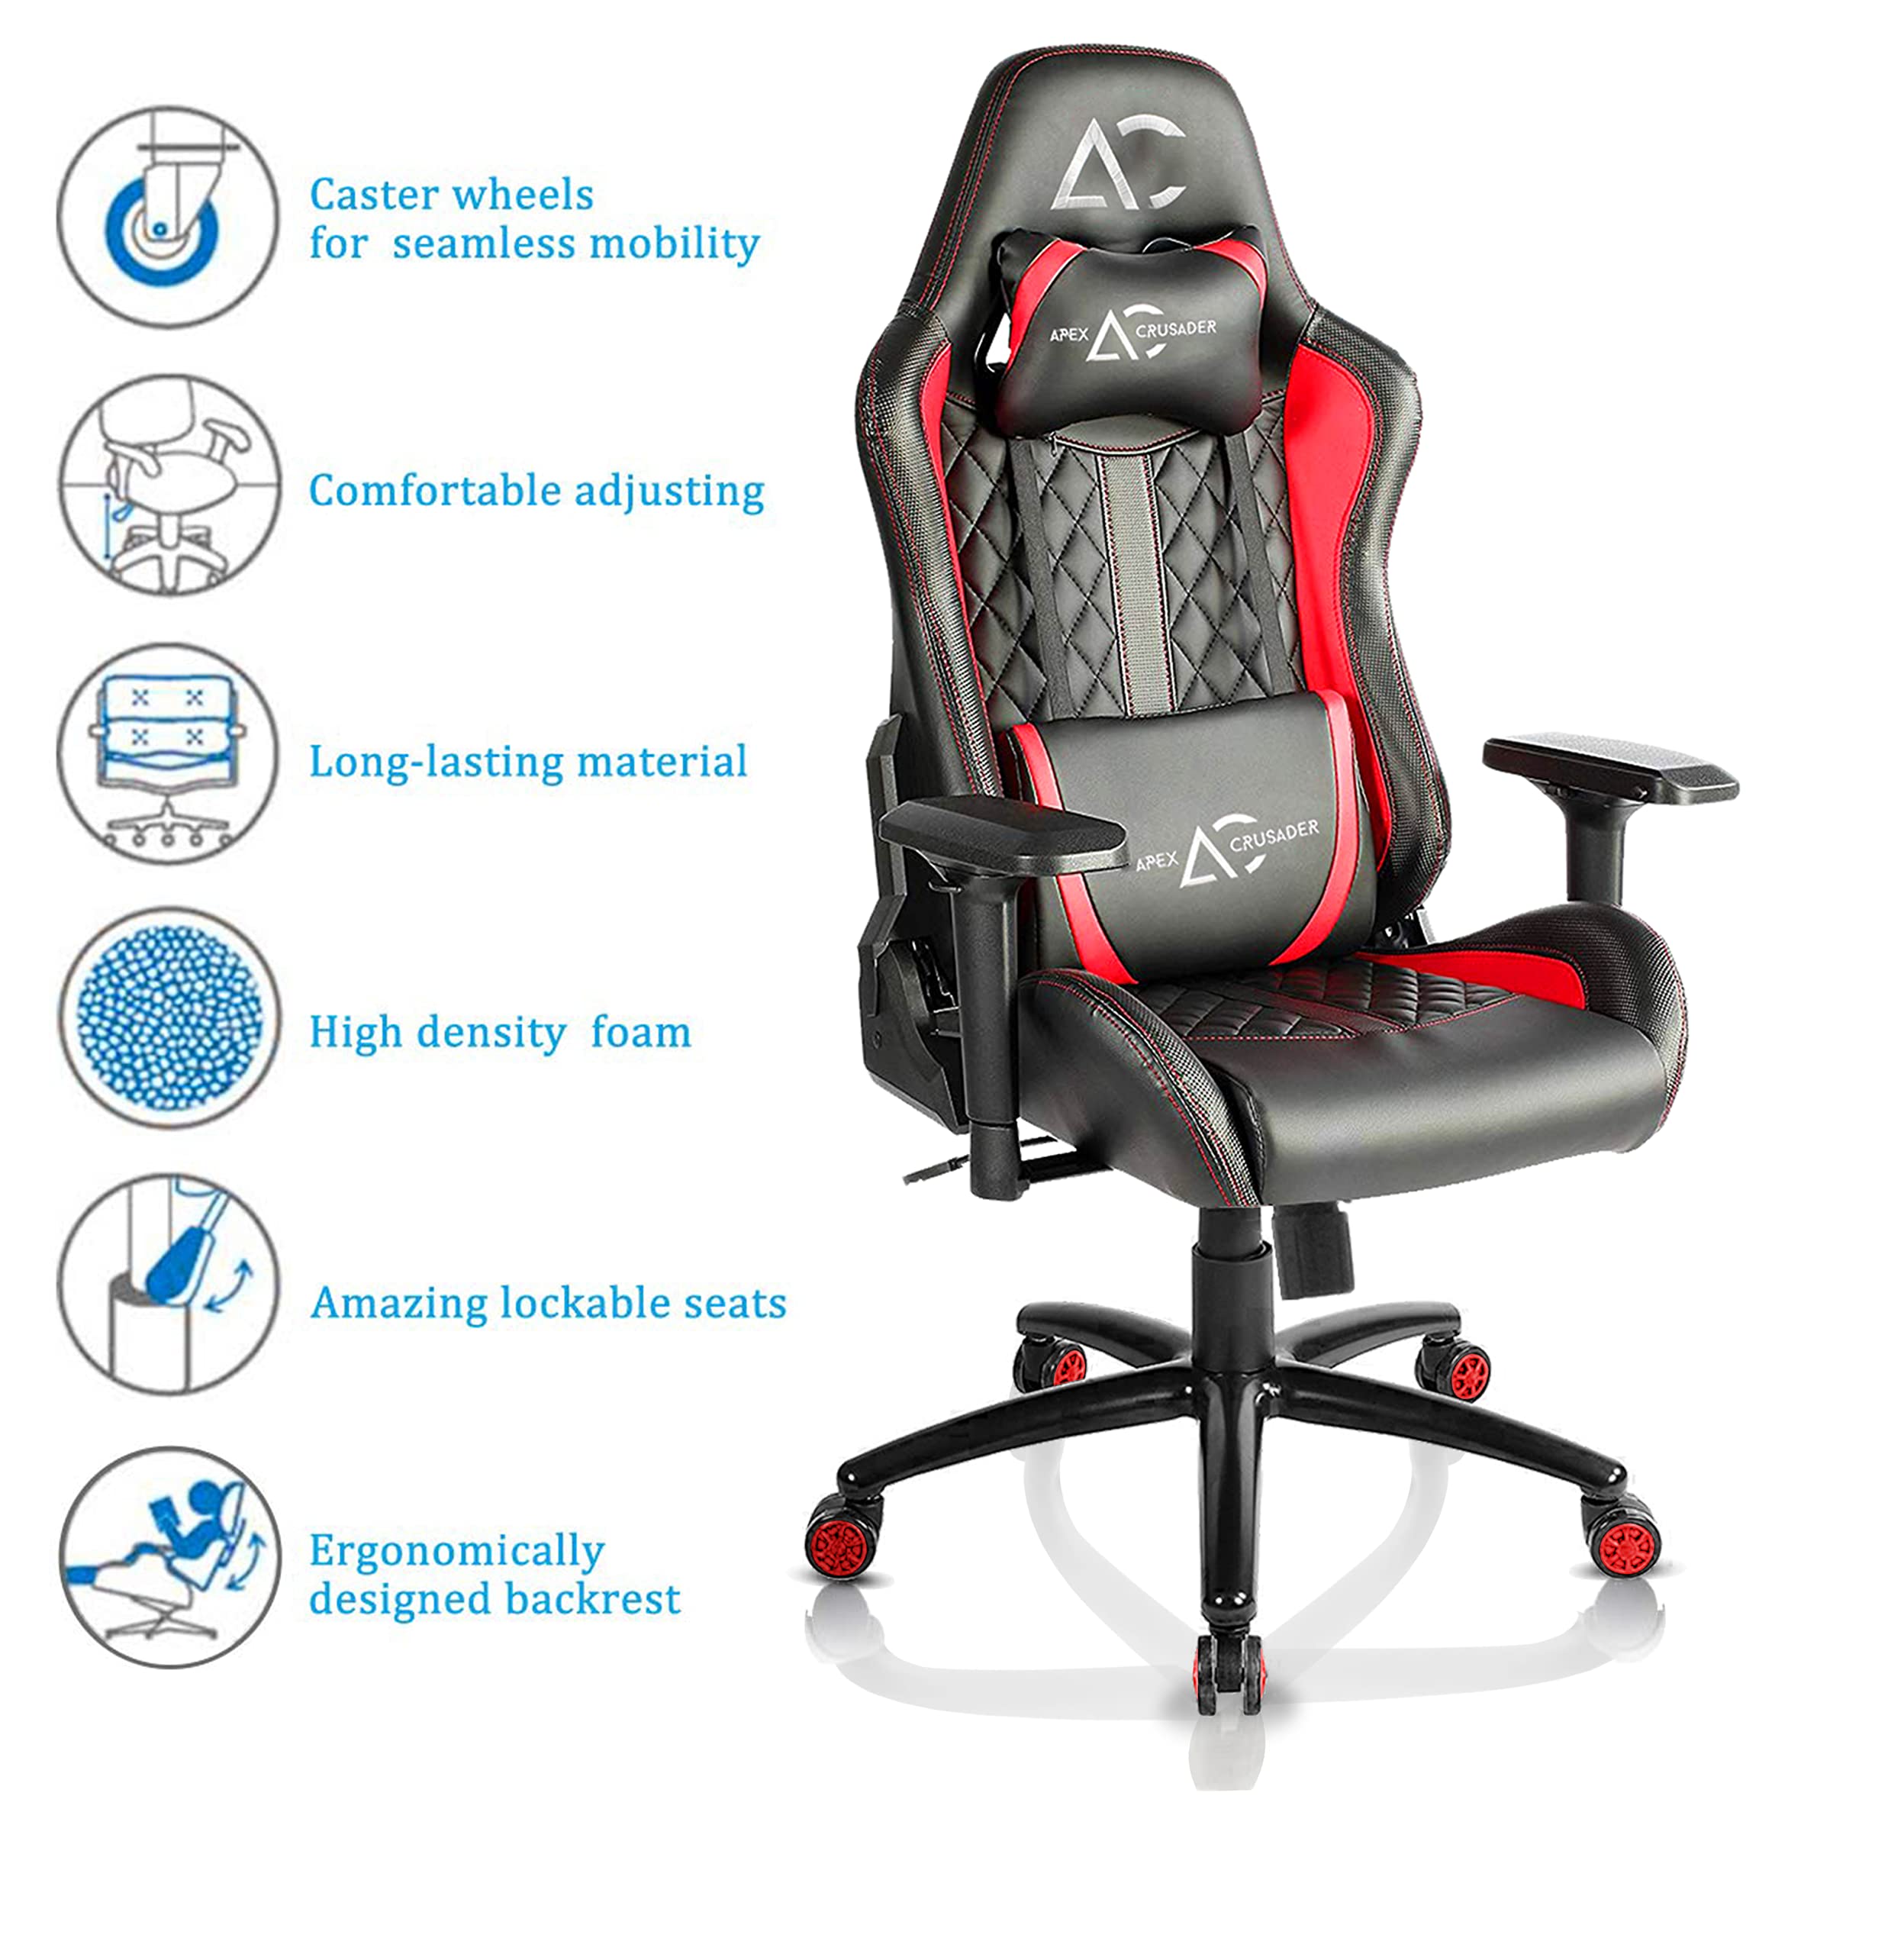 SAVYA HOME Apex Crusader XI Ergonomic Computer Gaming Chair and Office Chair with Aluminium Base, Removable Headrest, 3D Armrest(PU Leather, Red & Black, 1 Piece)